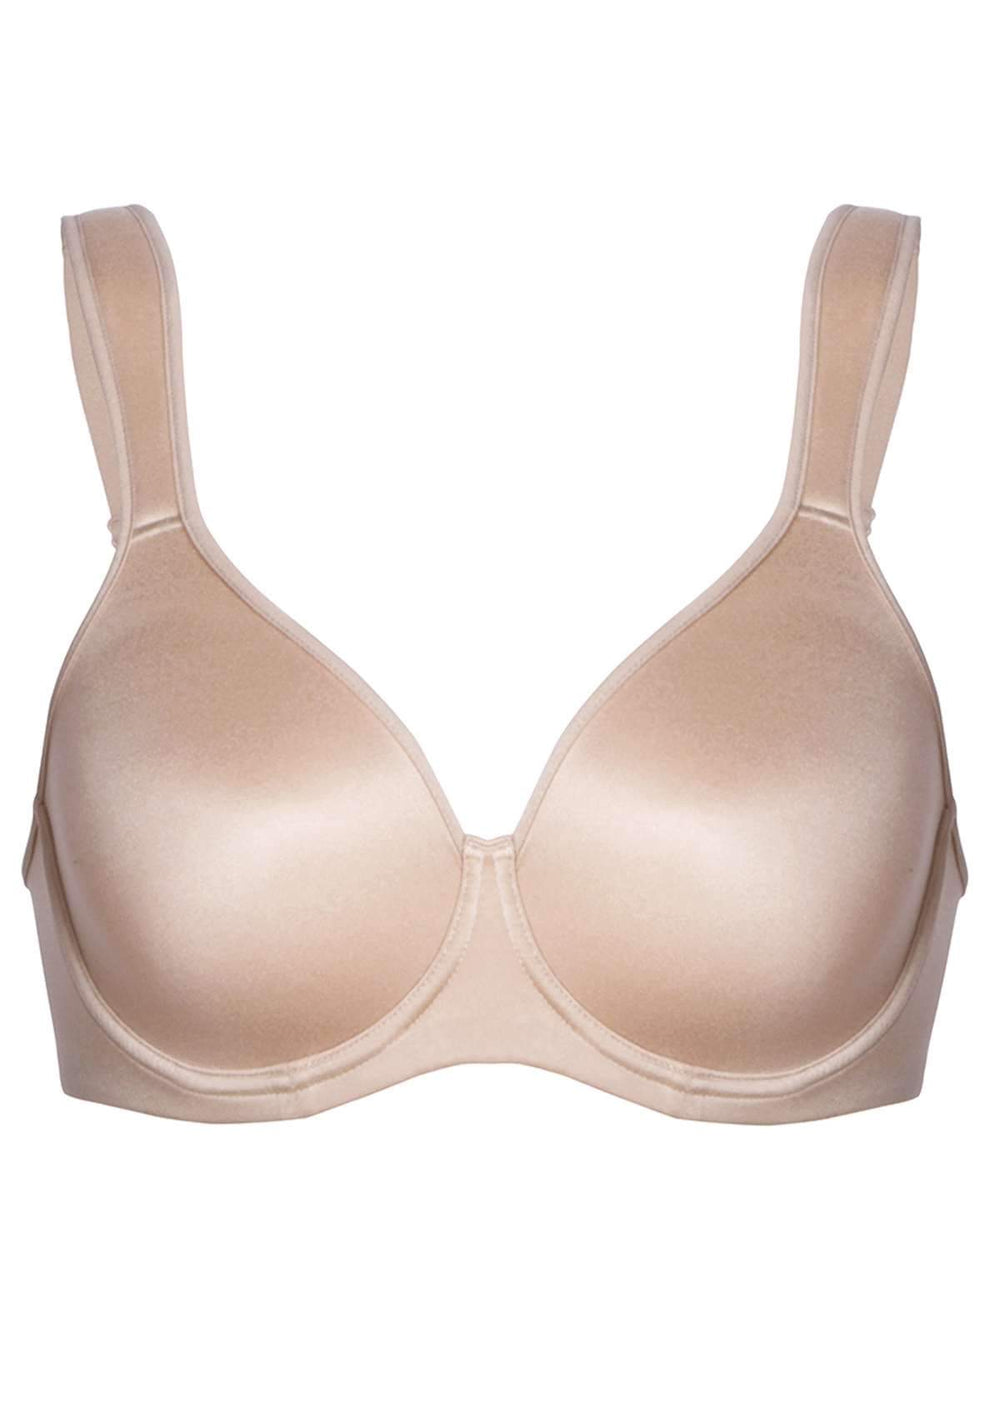 HSIA Women's Front Closure Minimizer Full Coverage Bras Unlined